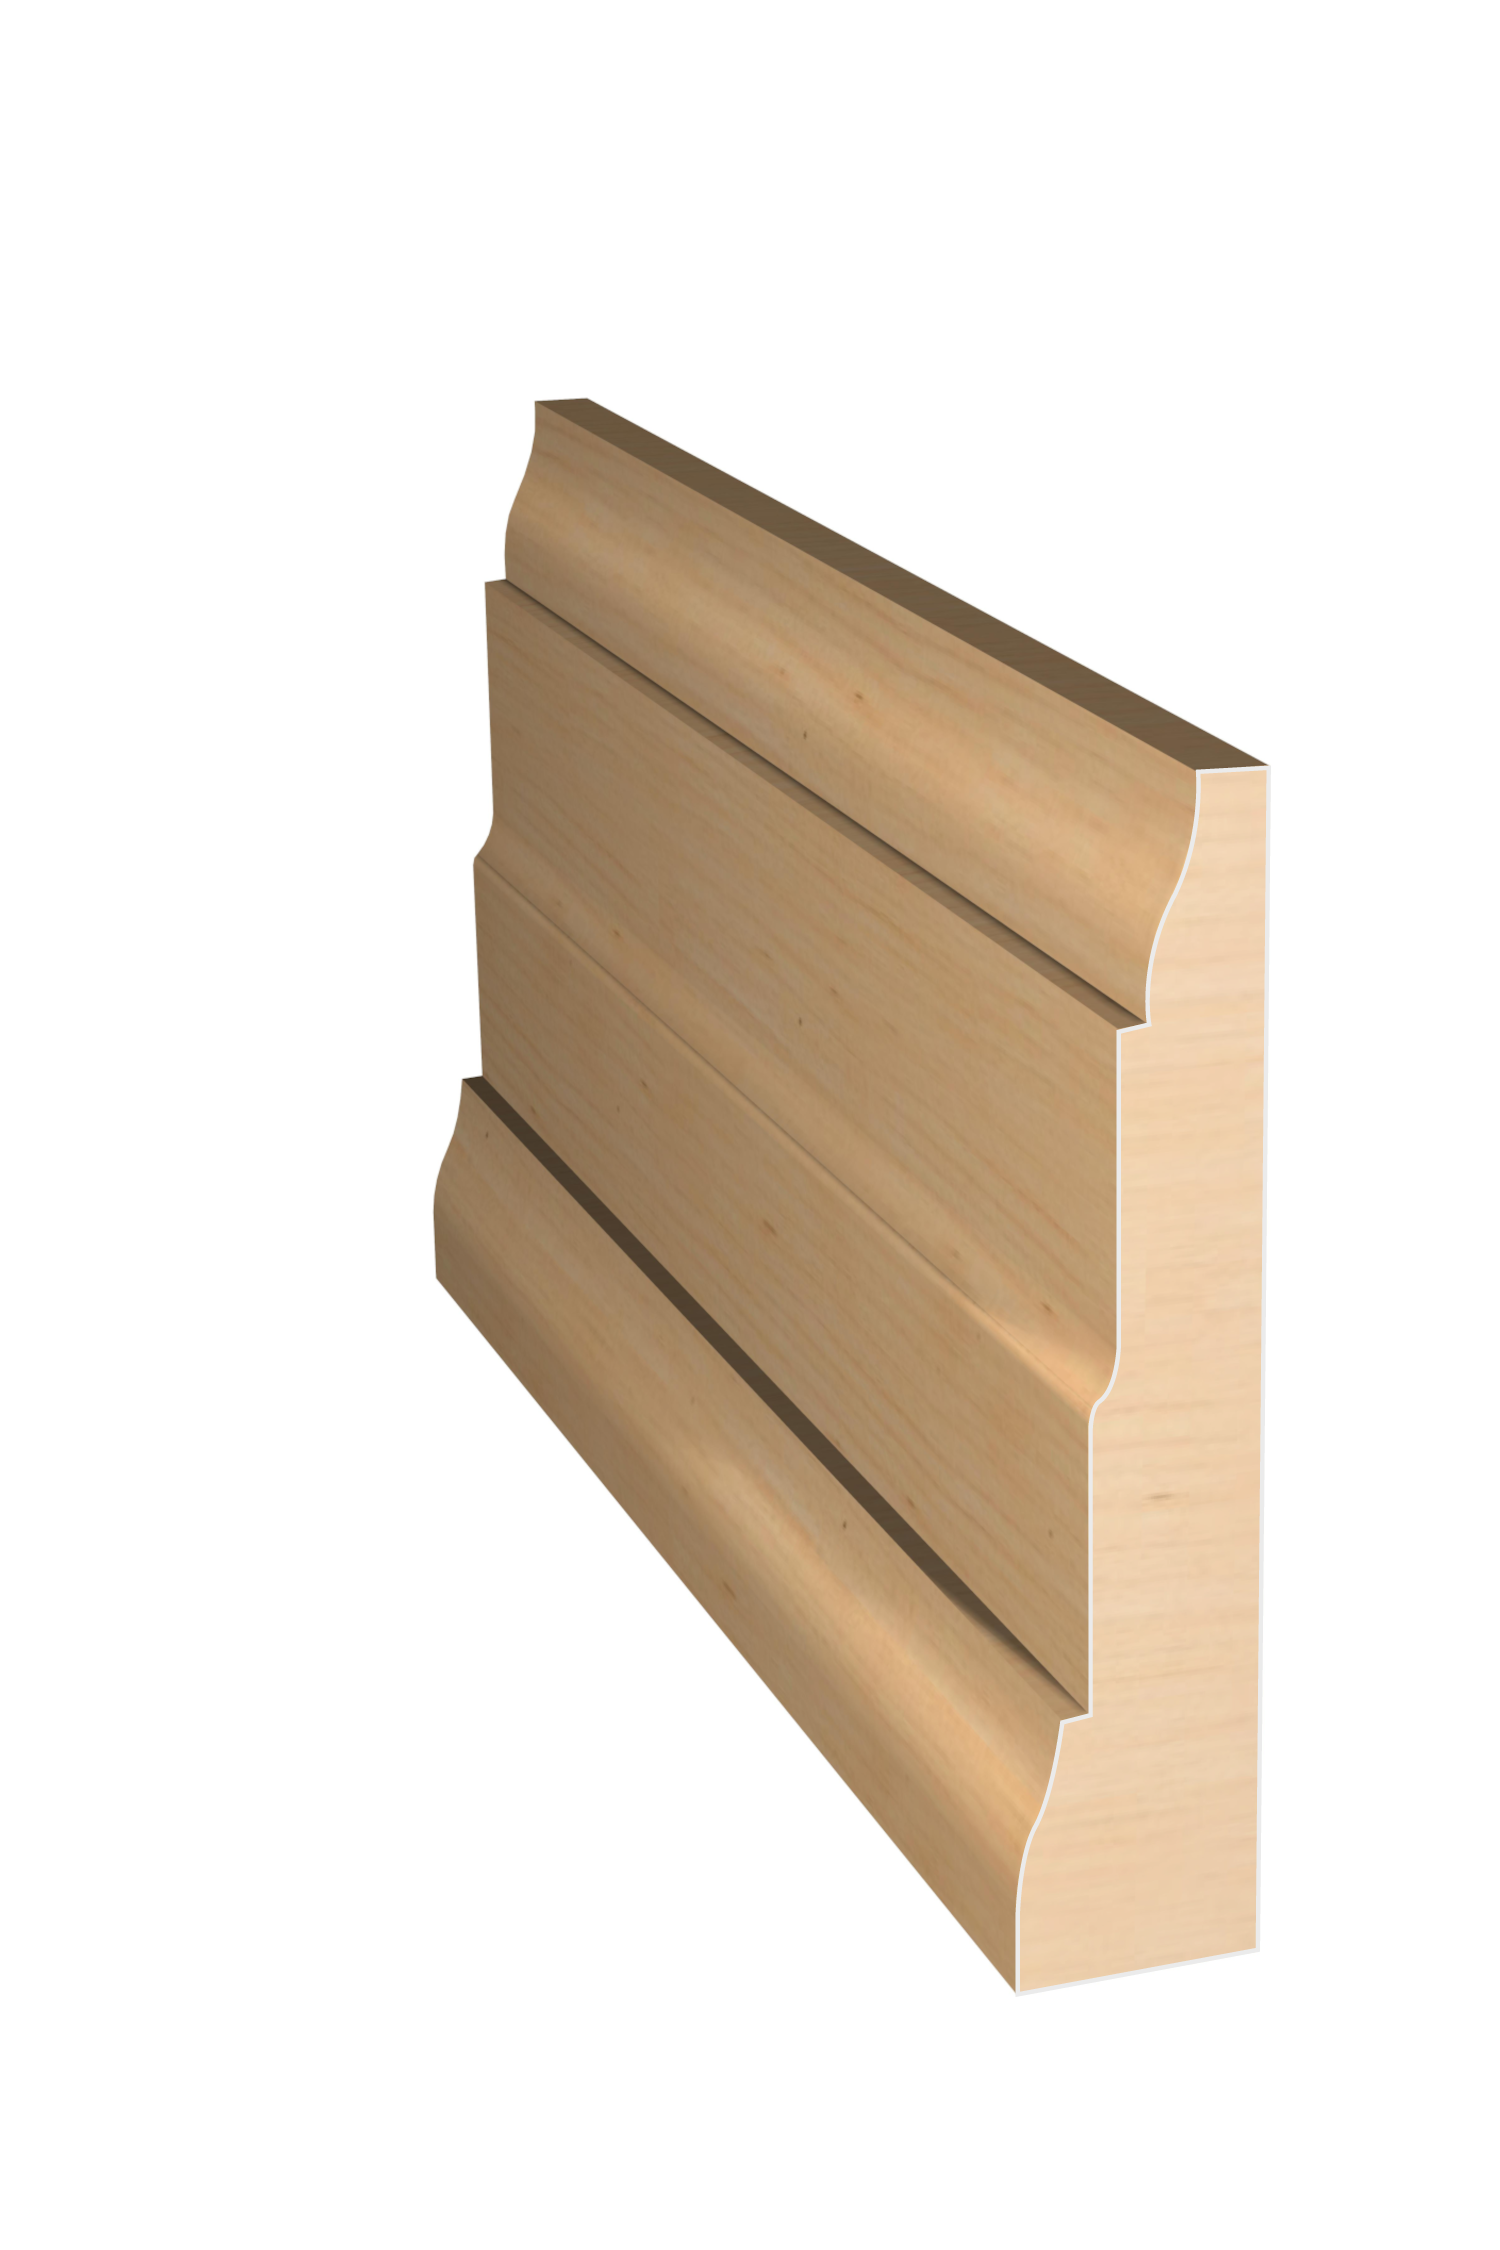 Three dimensional rendering of custom casing wood molding CAPL31425 made by Public Lumber Company in Detroit.